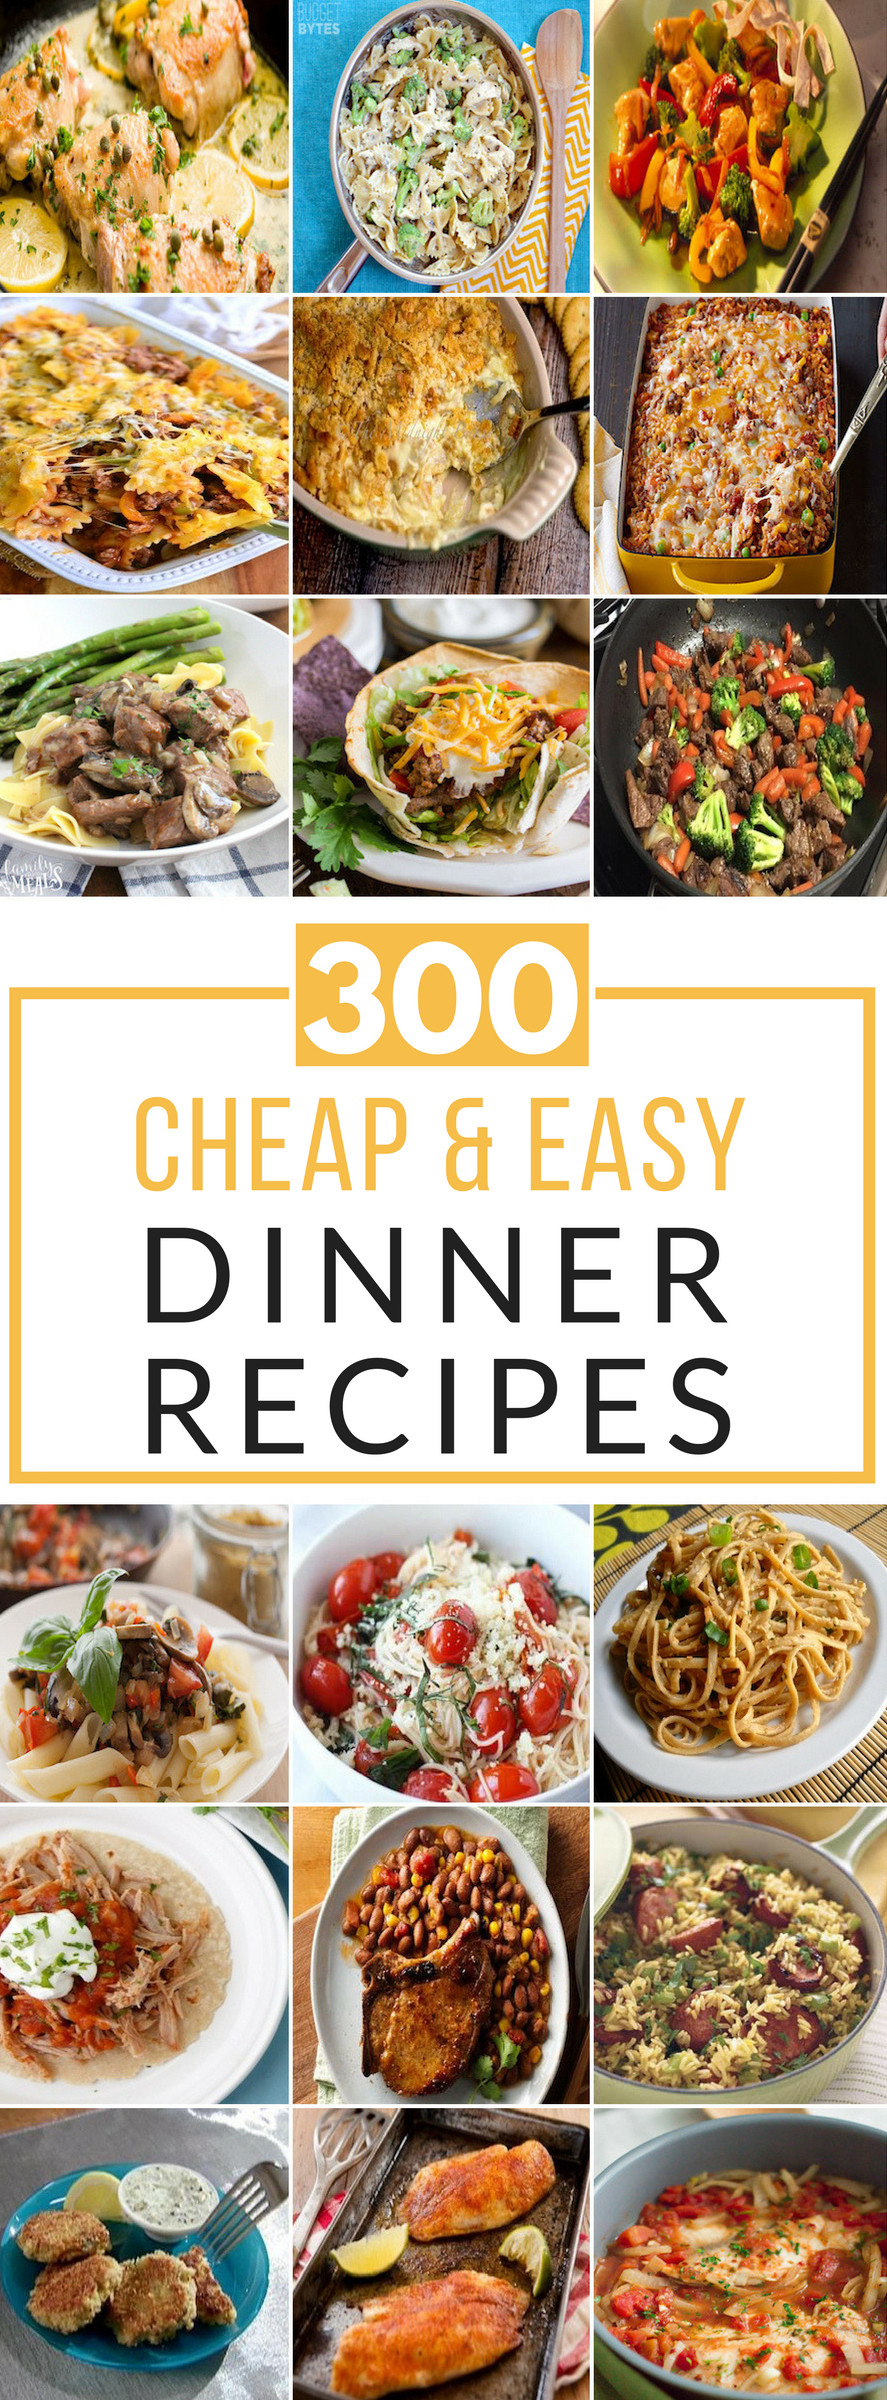 Cheap And Easy Dinner Ideas
 300 Cheap and Easy Dinner Recipes Prudent Penny Pincher